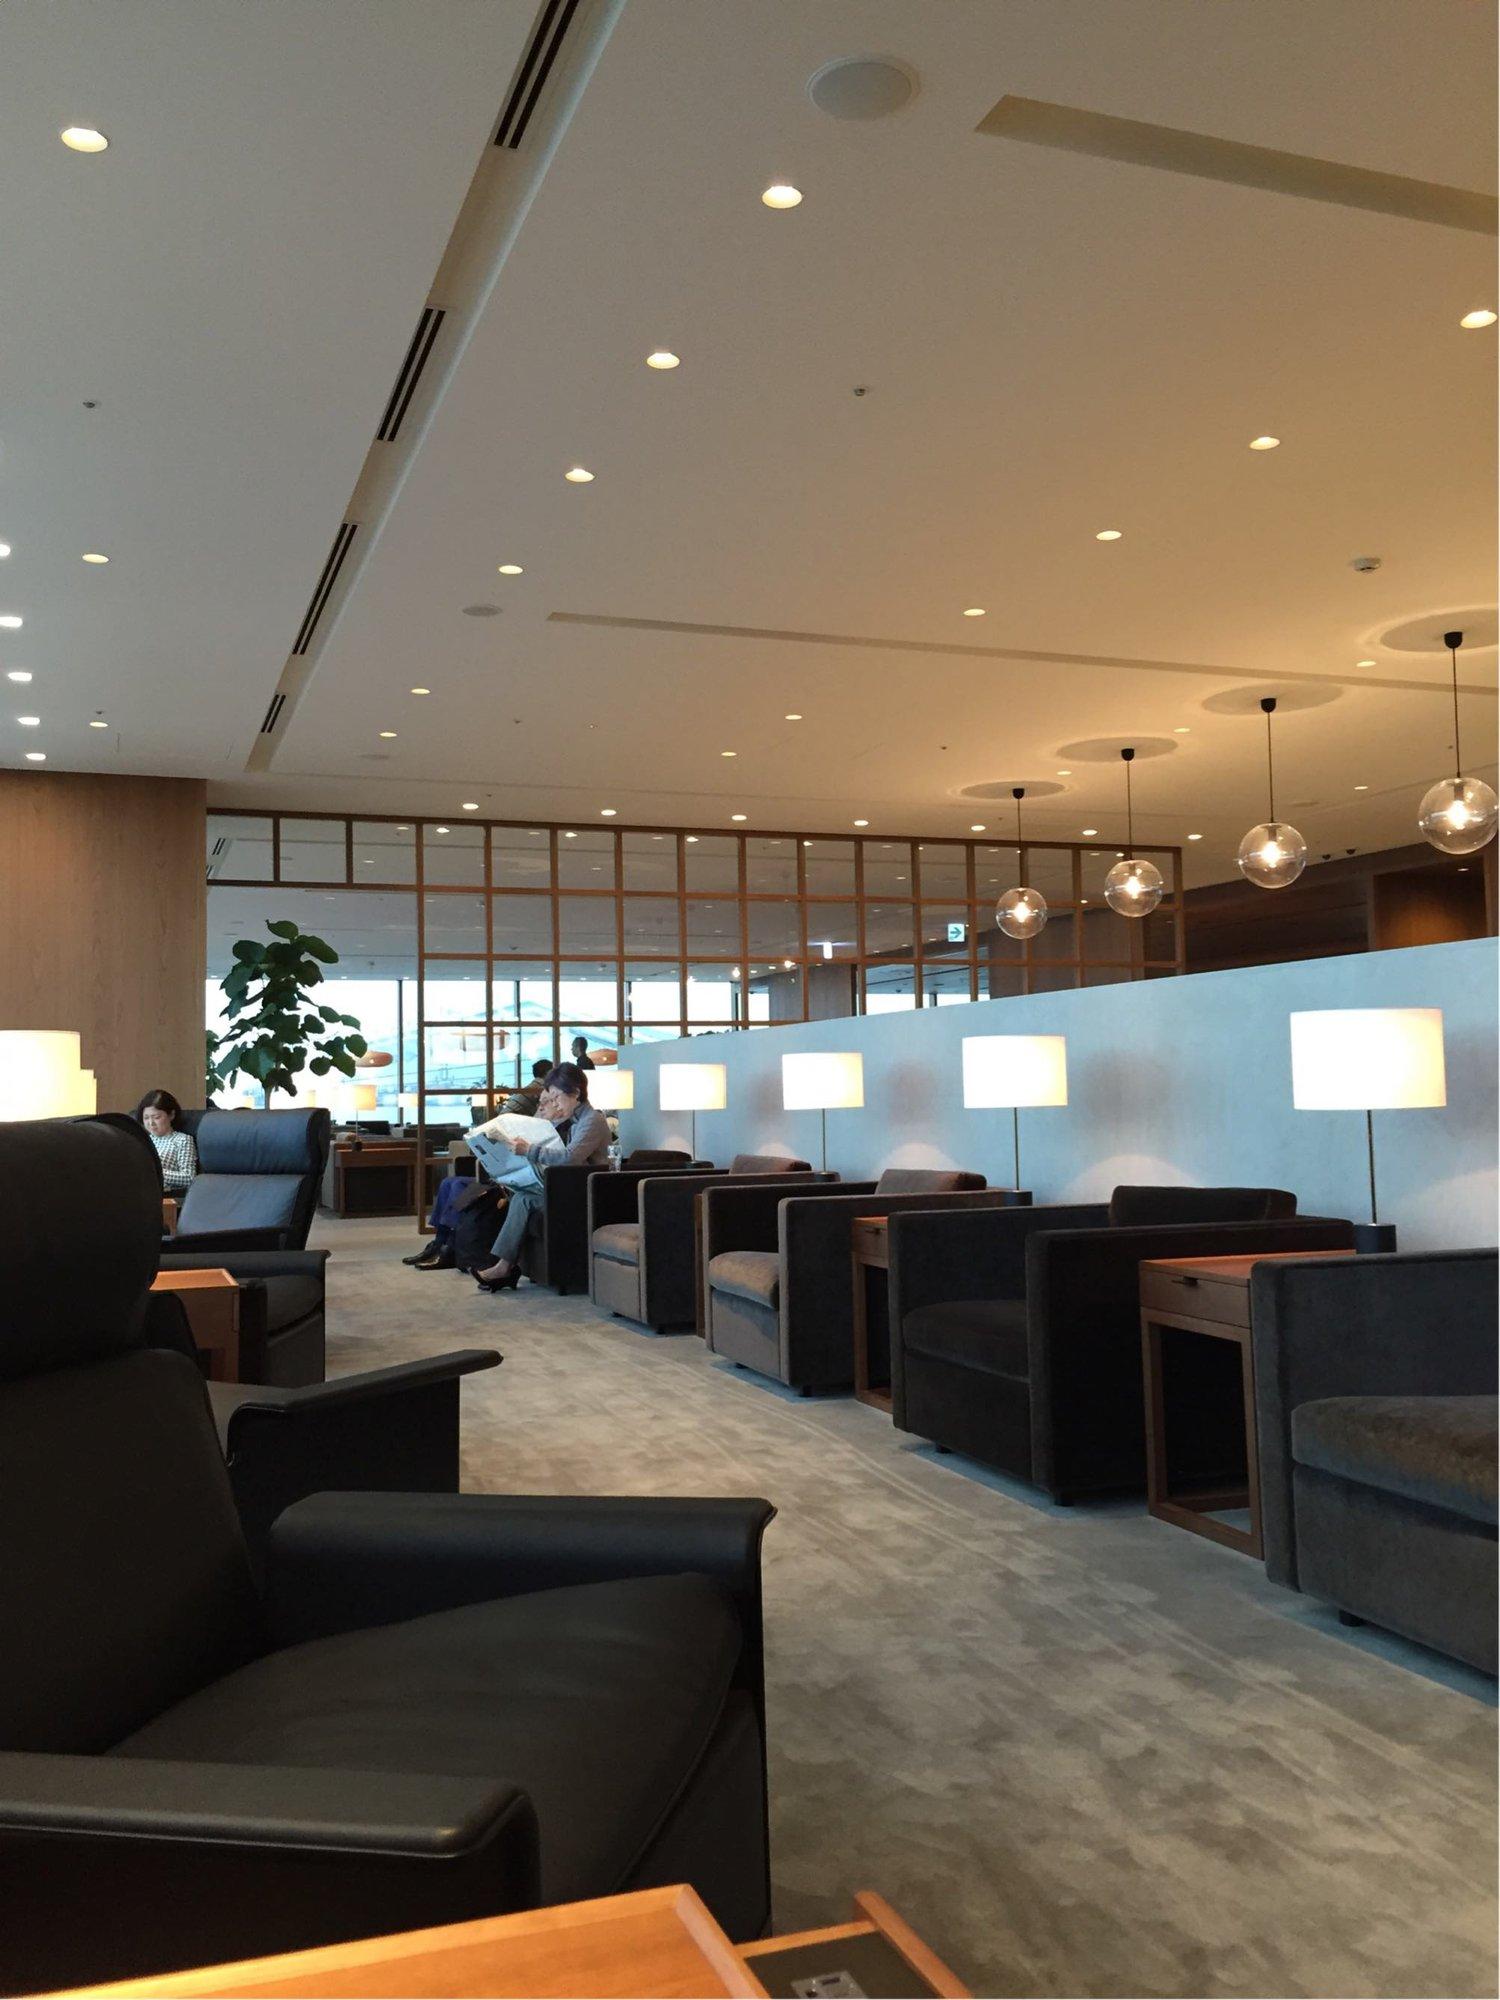 Cathay Pacific Lounge image 1 of 49